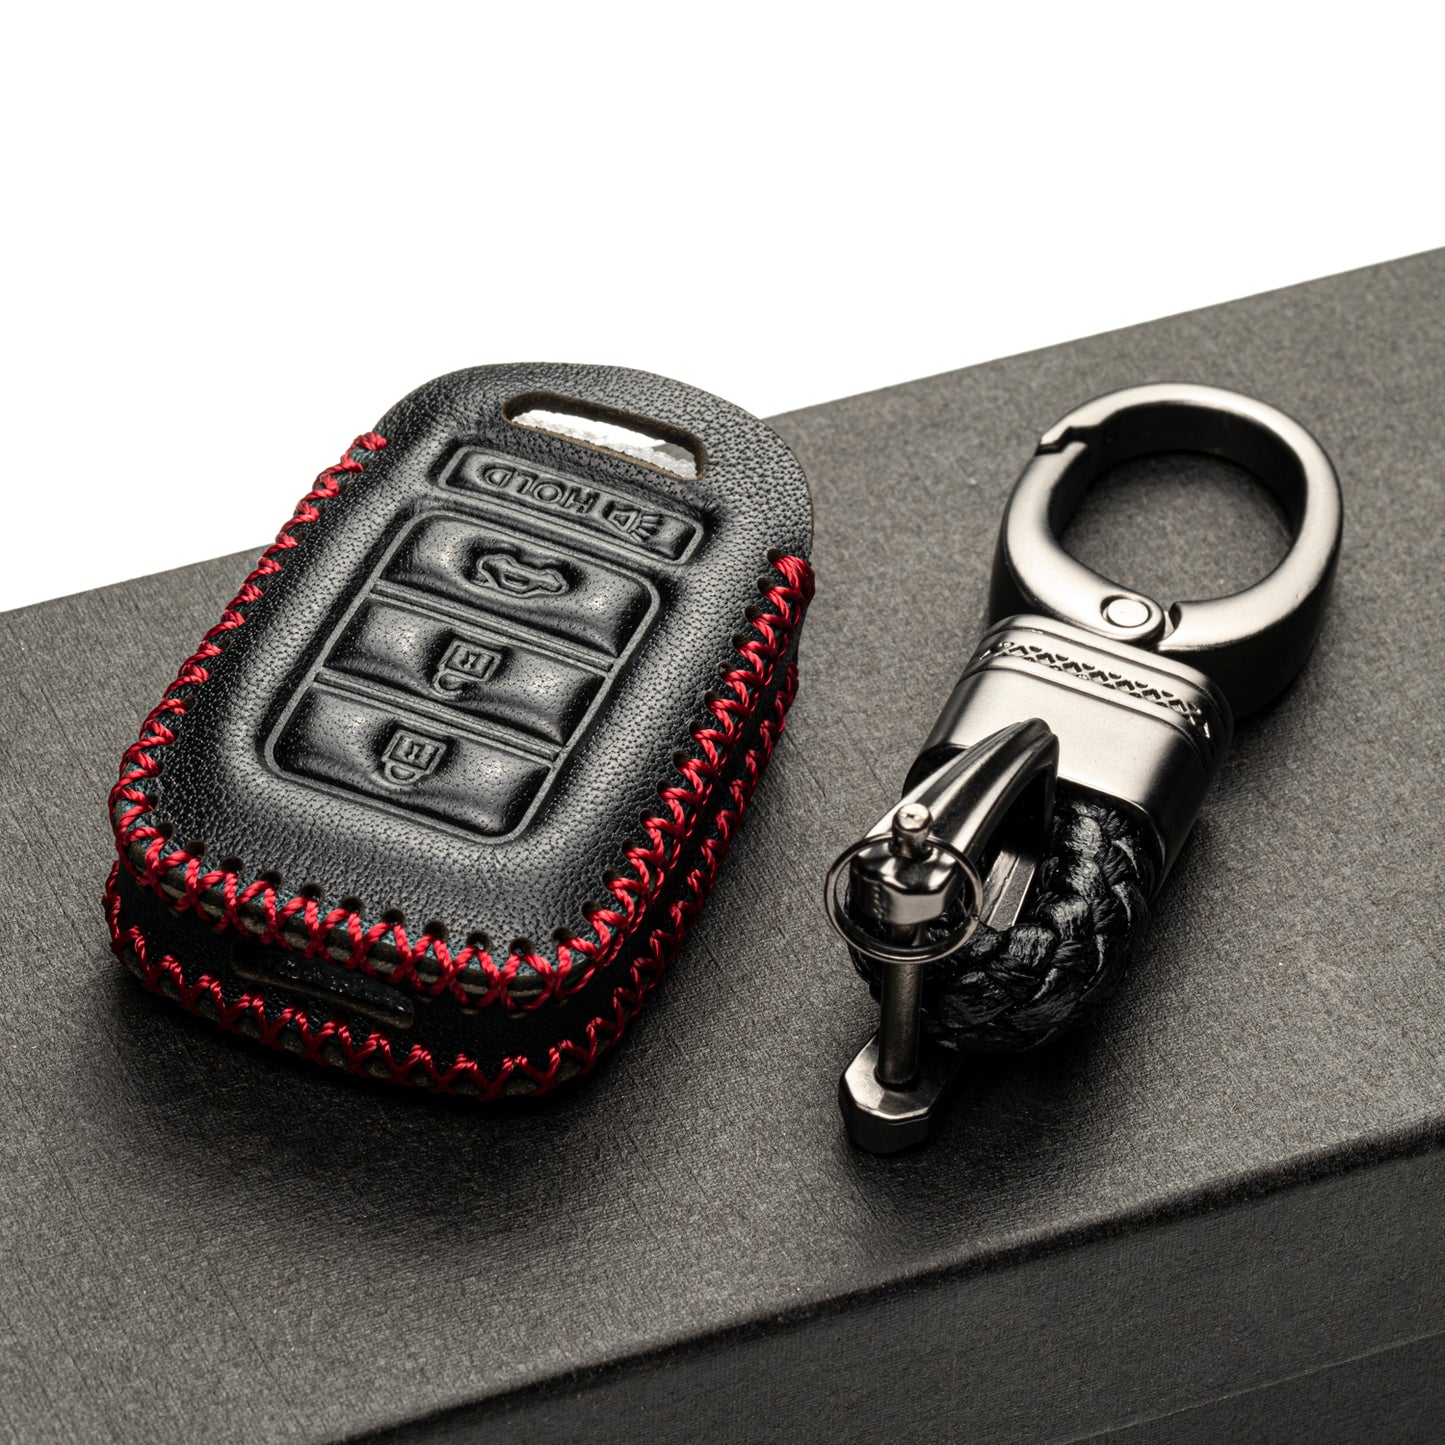 Vitodeco 4-Button Genuine Leather Key Fob Case Cover Protector Compatible for 2013-2017 Honda Civic, Accord, CR-V